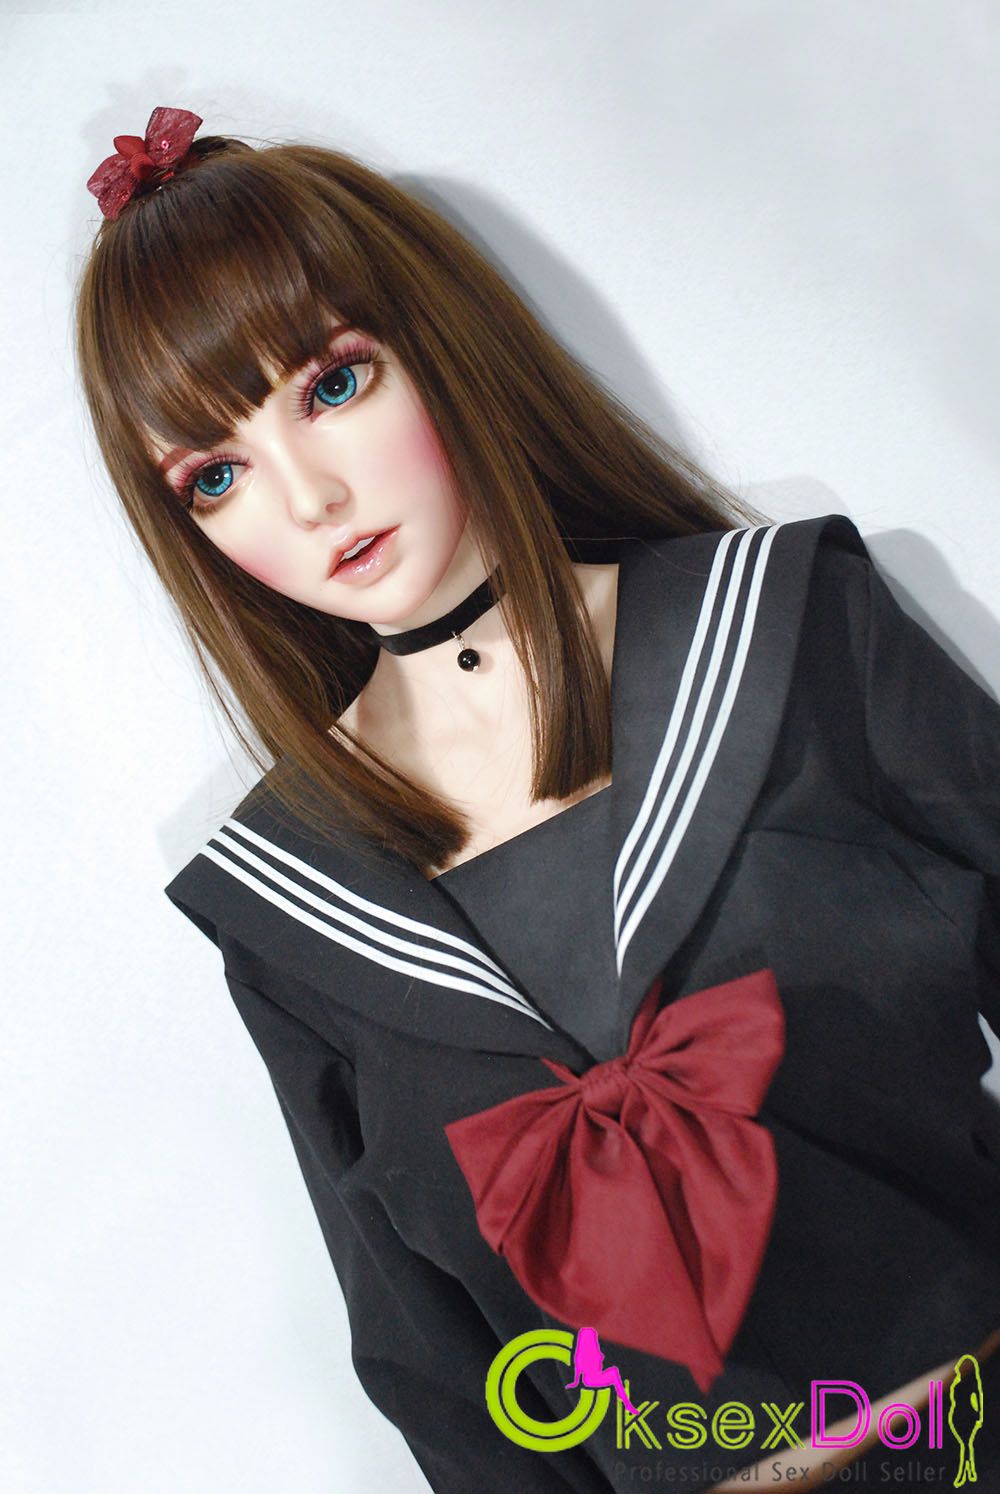 elsababe-doll.html Love Doll Pictures